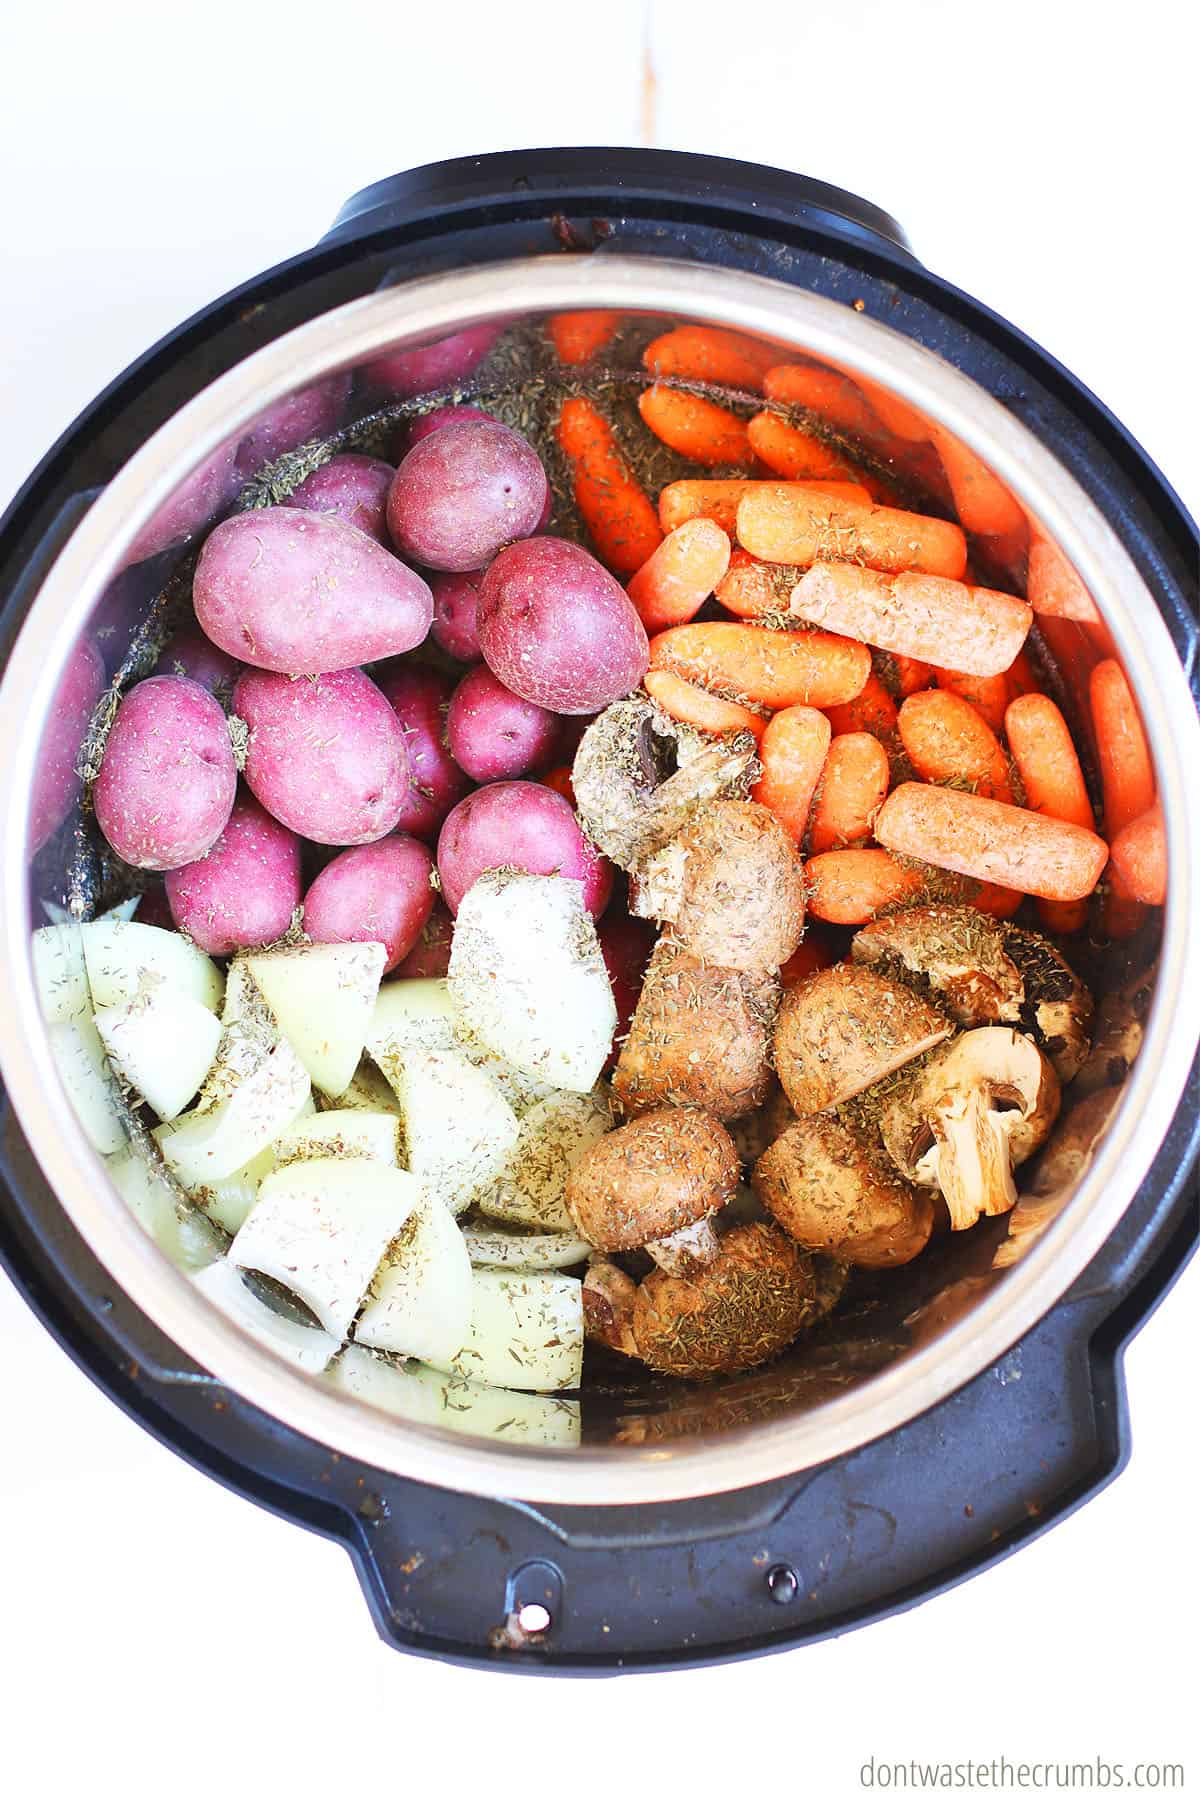 You can use a variety of vegetables. Pictured is a top view of potatoes, carrots, onion, mushrooms, beef, and spices in an Instant Pot.